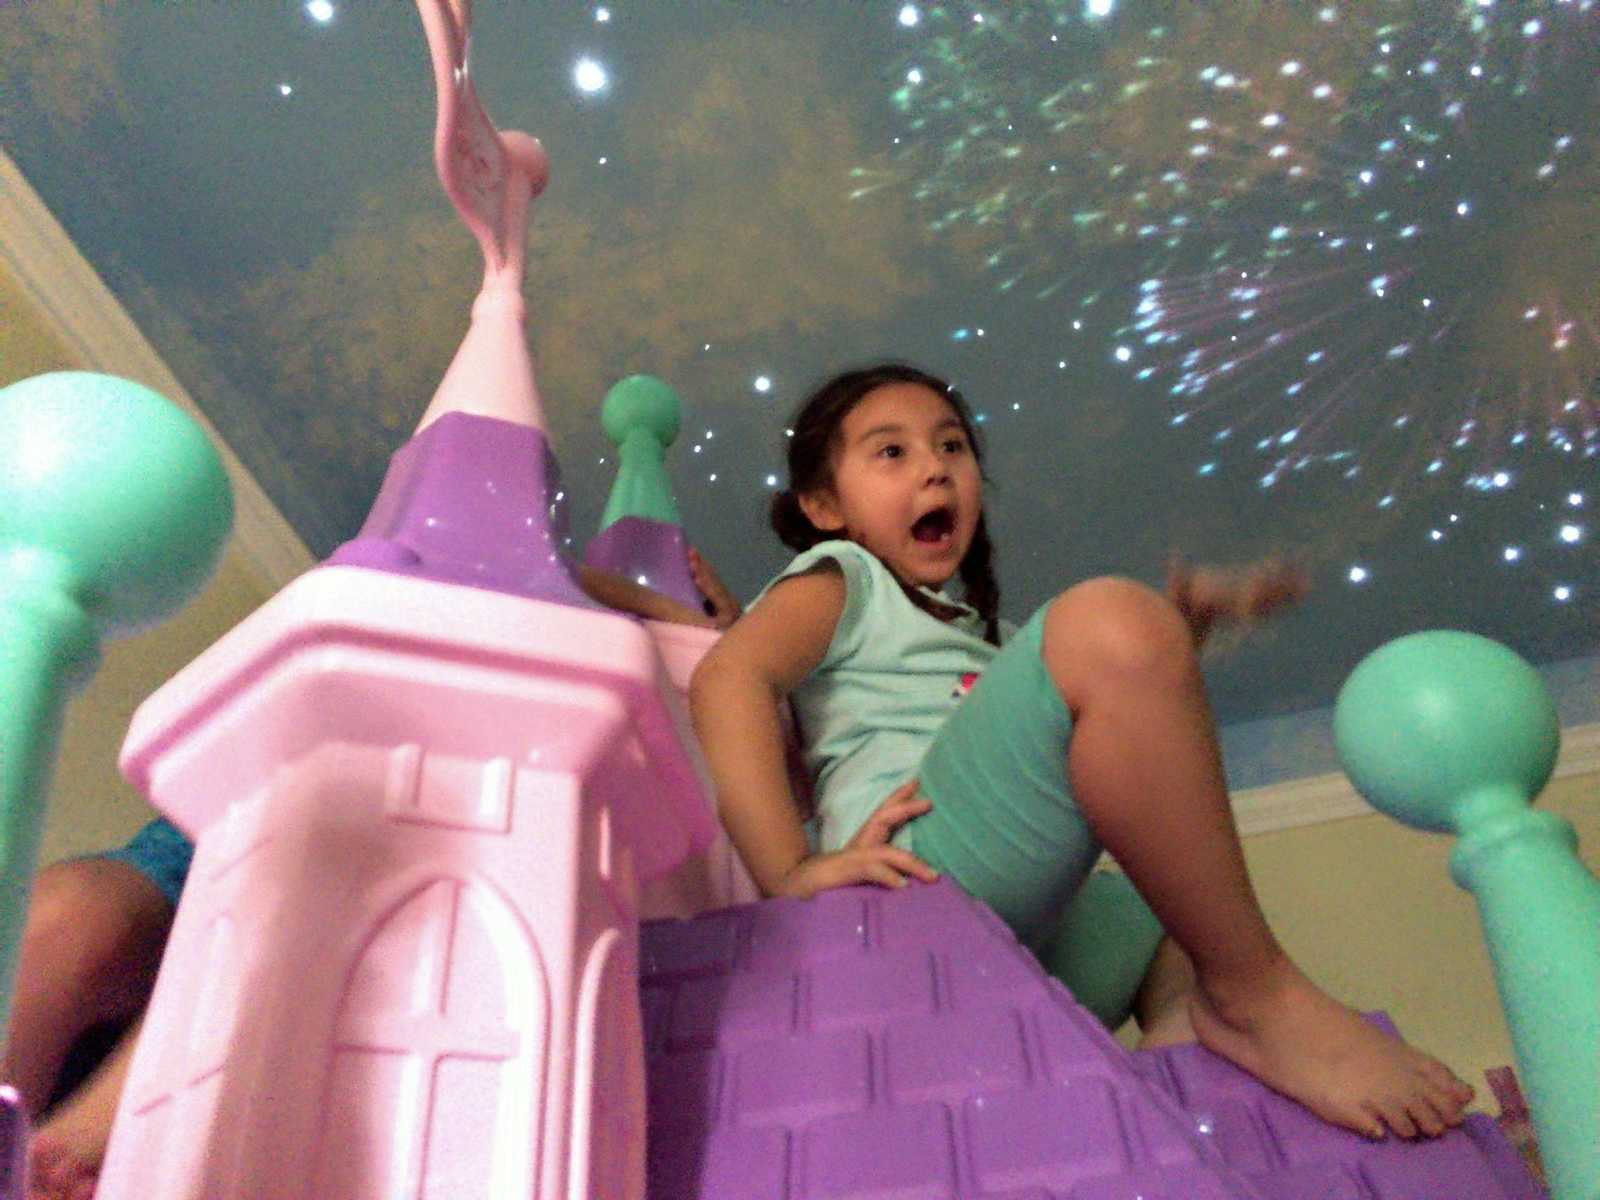 Little girl sits on top of princess castle in her bedroom and ceiling has fireworks